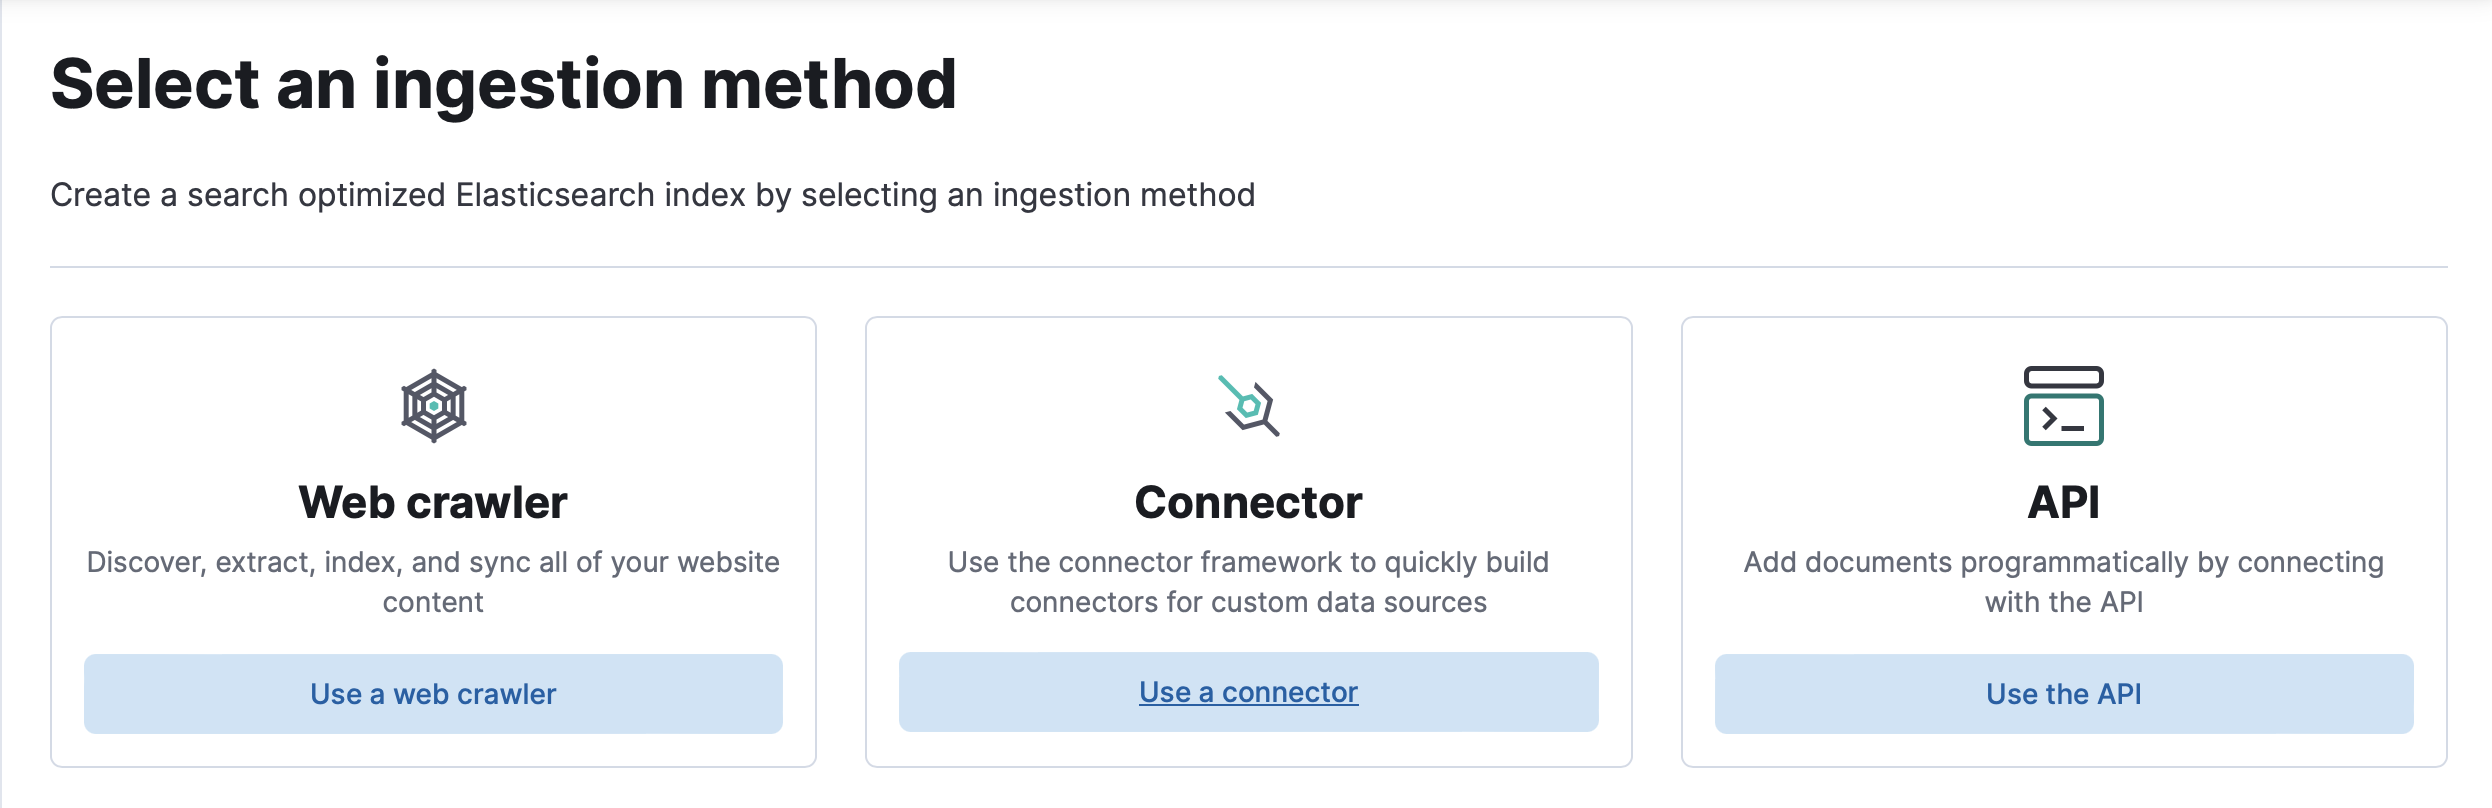 use a connector workflow